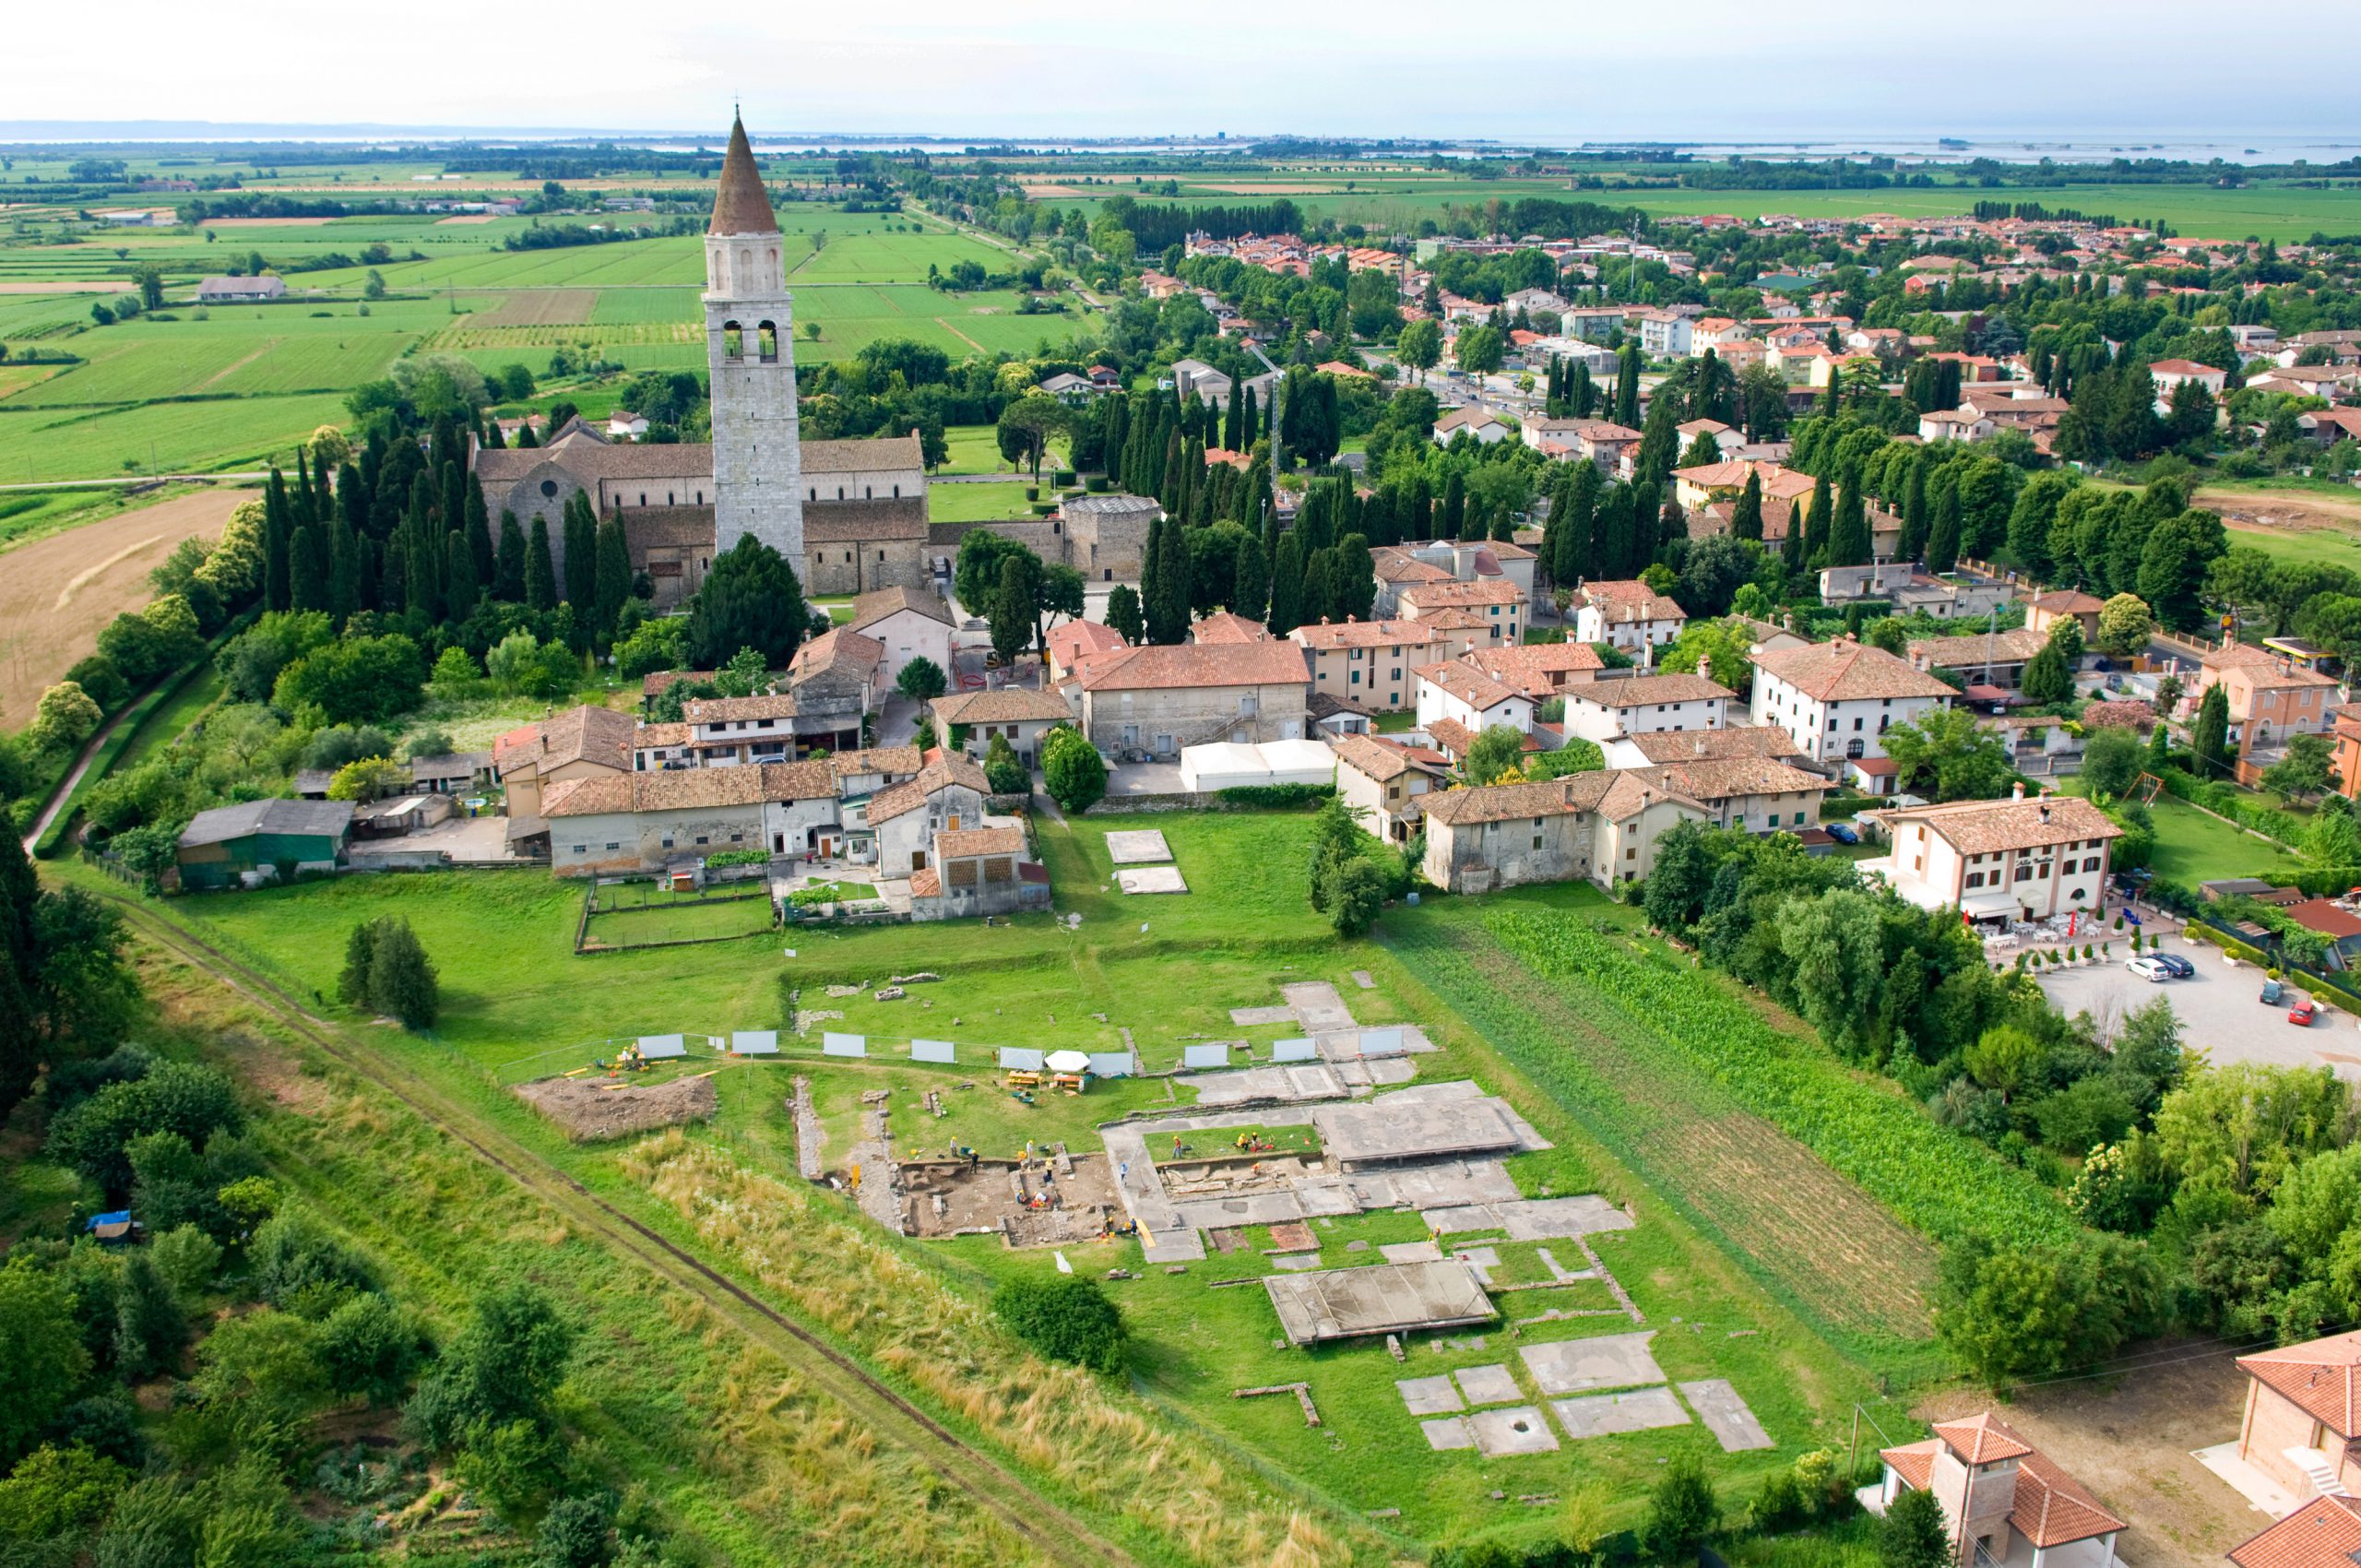 Roman excavations in Aquileia - an exciting excursion on a cycling holiday